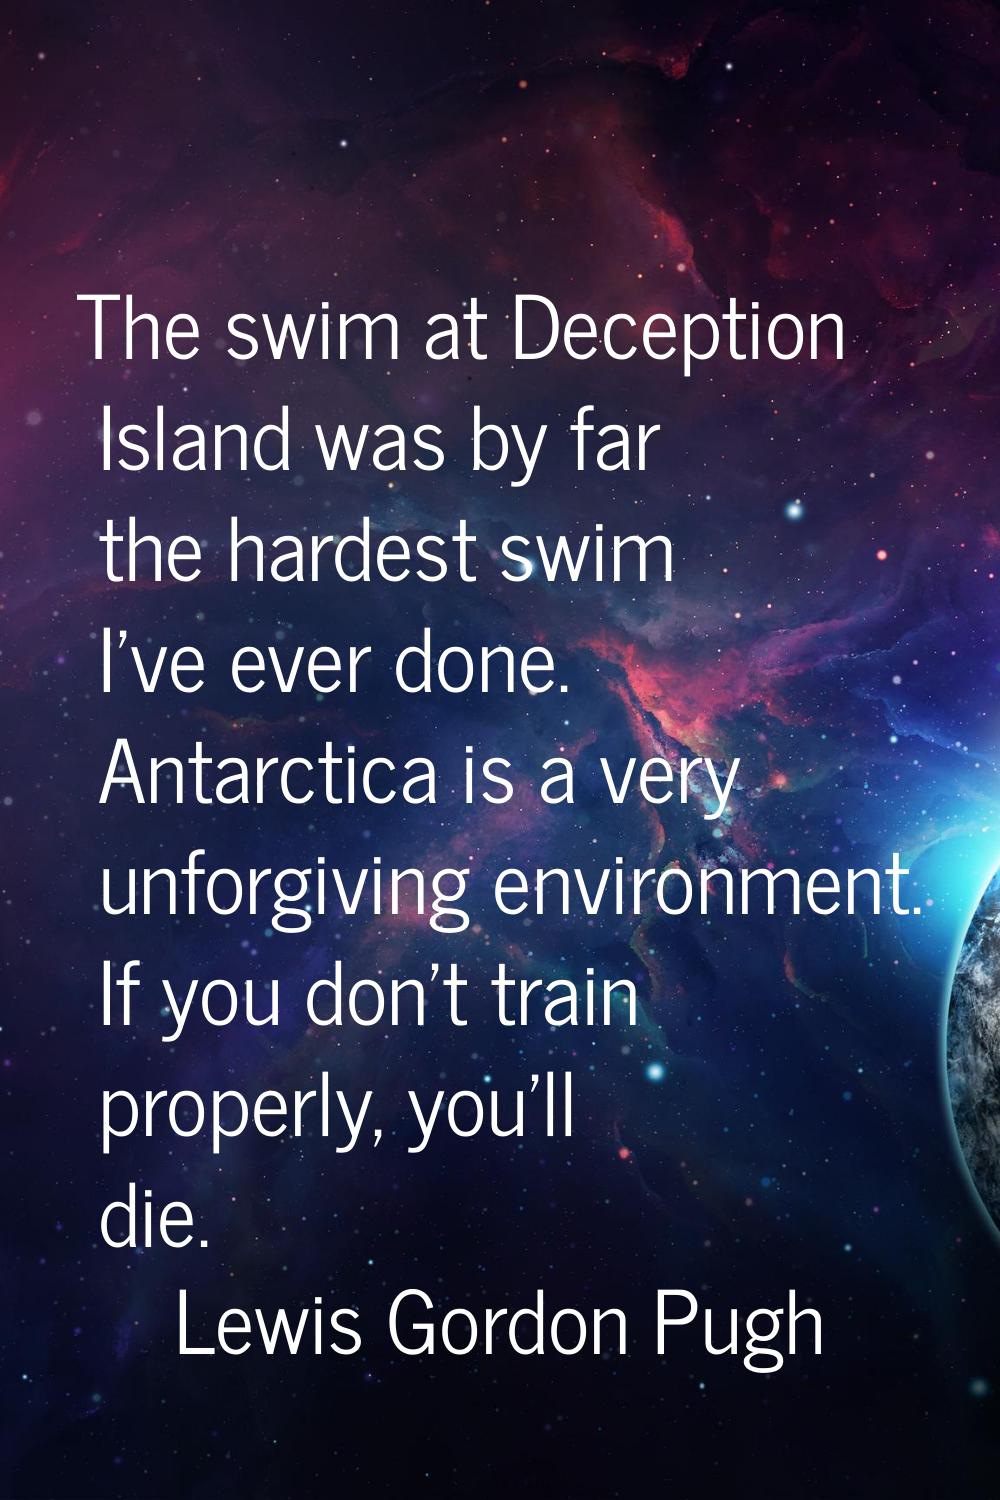 The swim at Deception Island was by far the hardest swim I've ever done. Antarctica is a very unfor